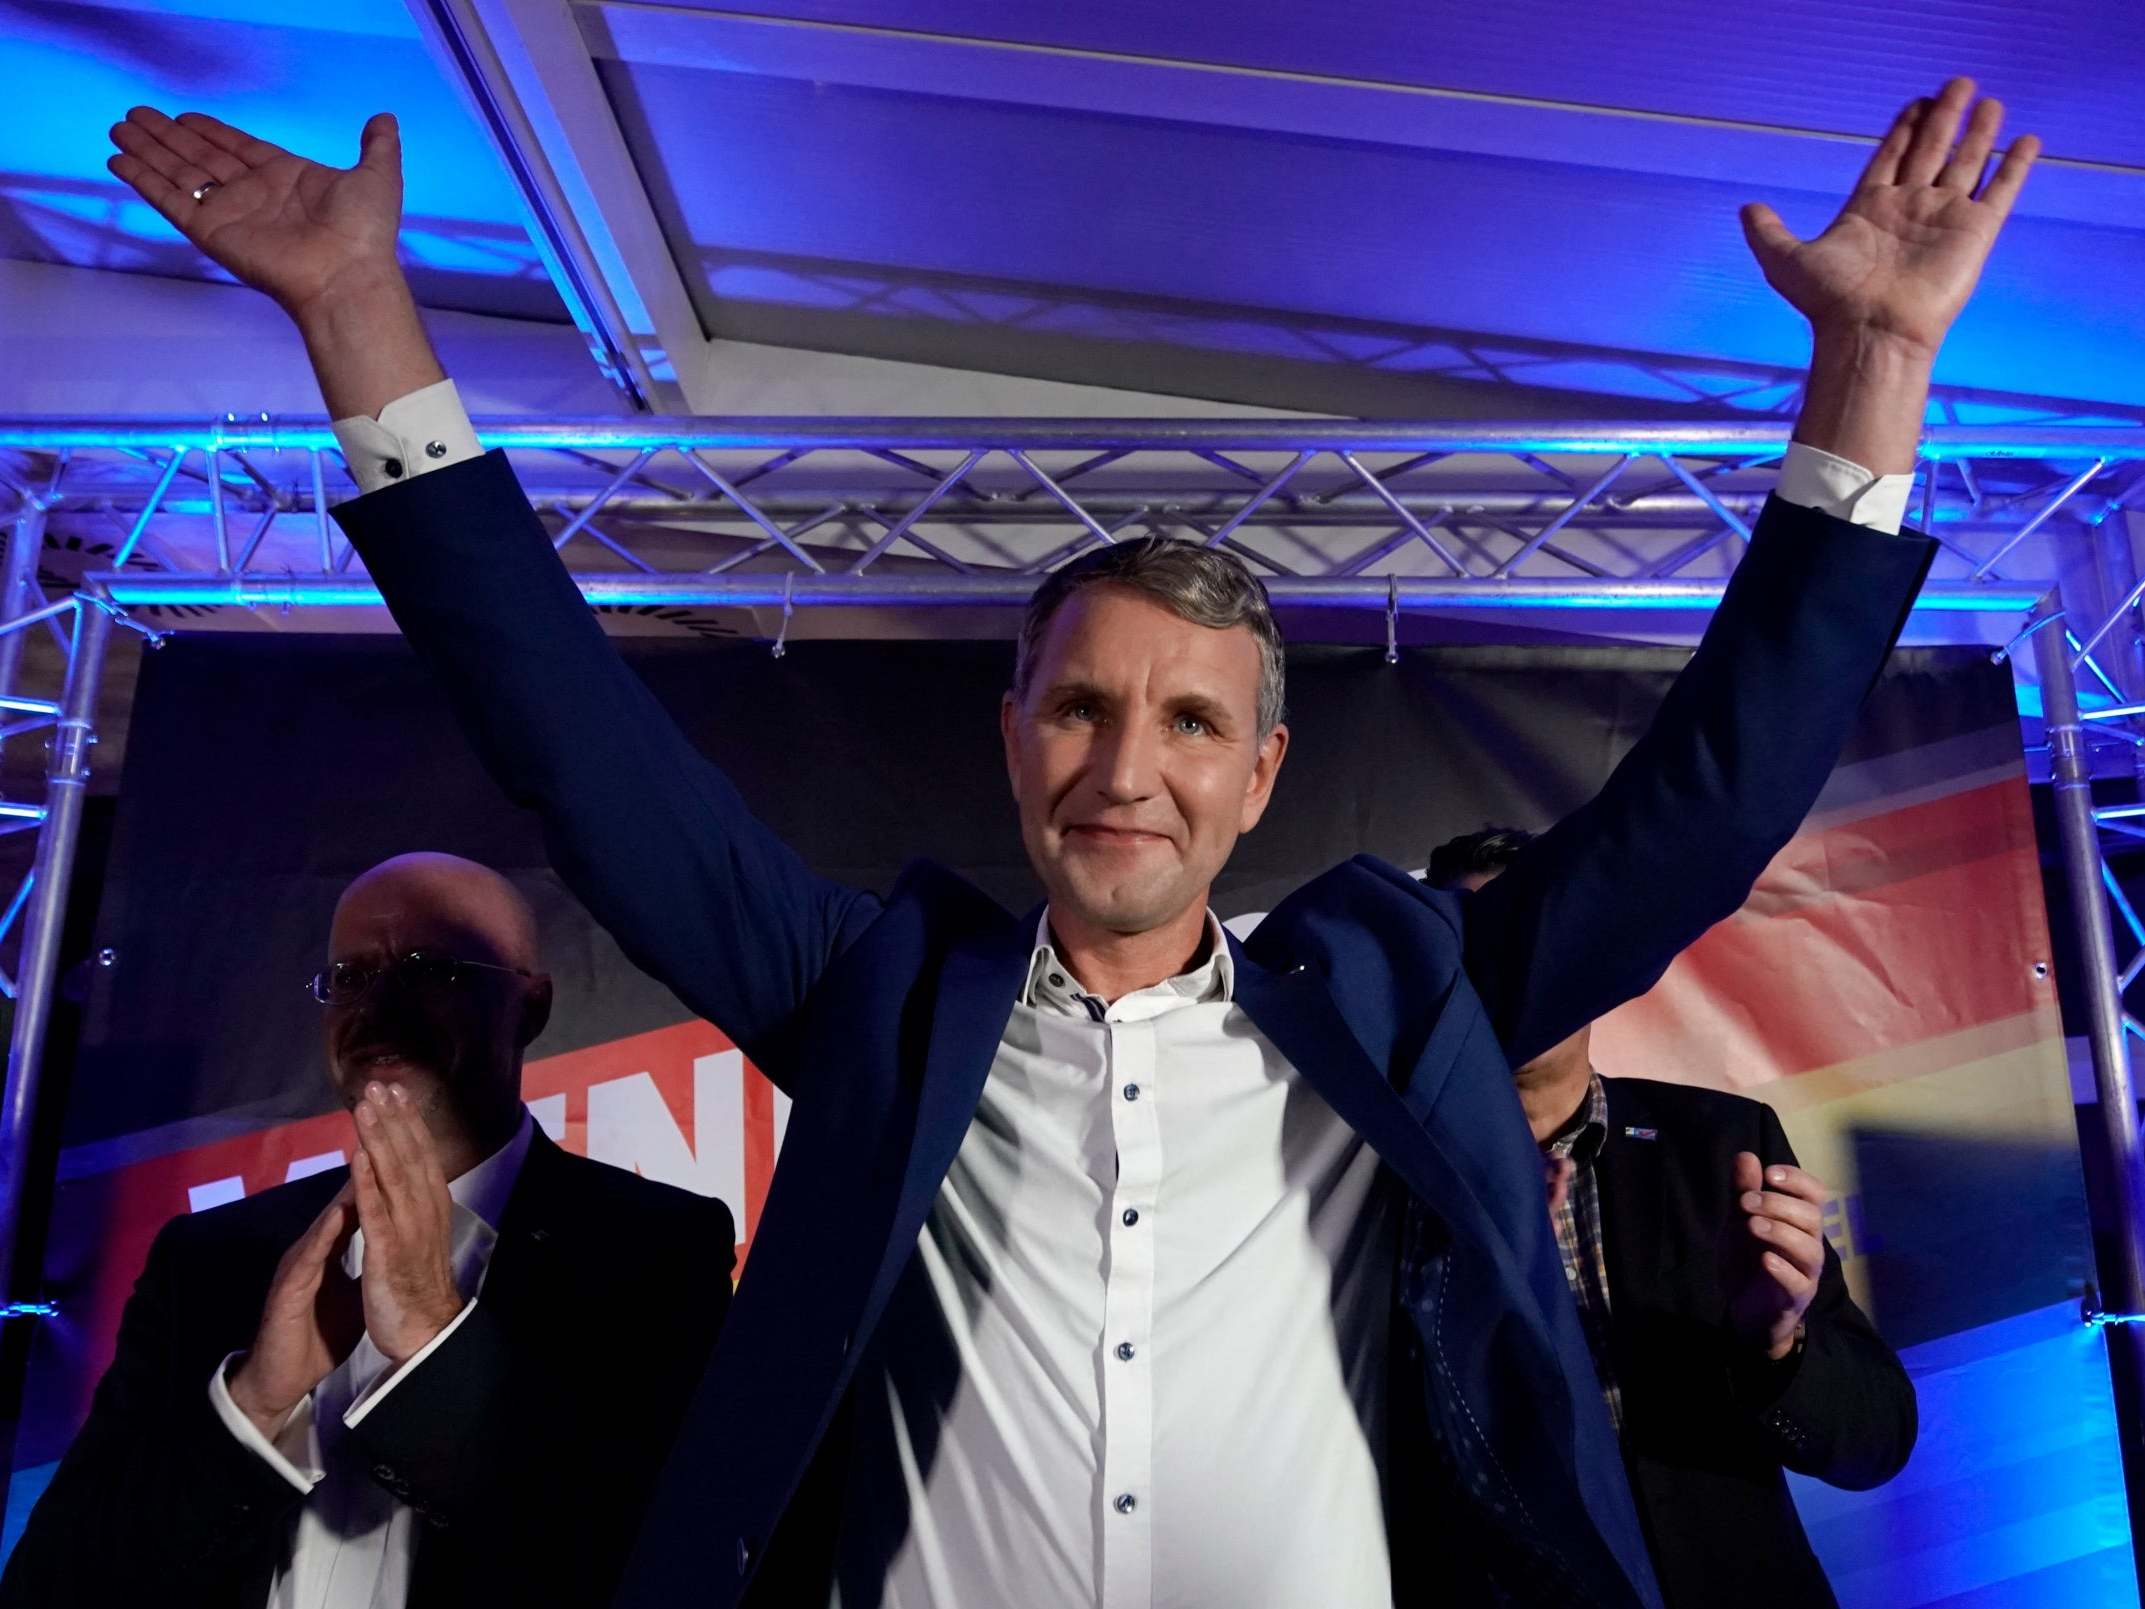 Bjoern Hoecke, Thuringia chairman of the Alternative for Germany party, celebrates the election result